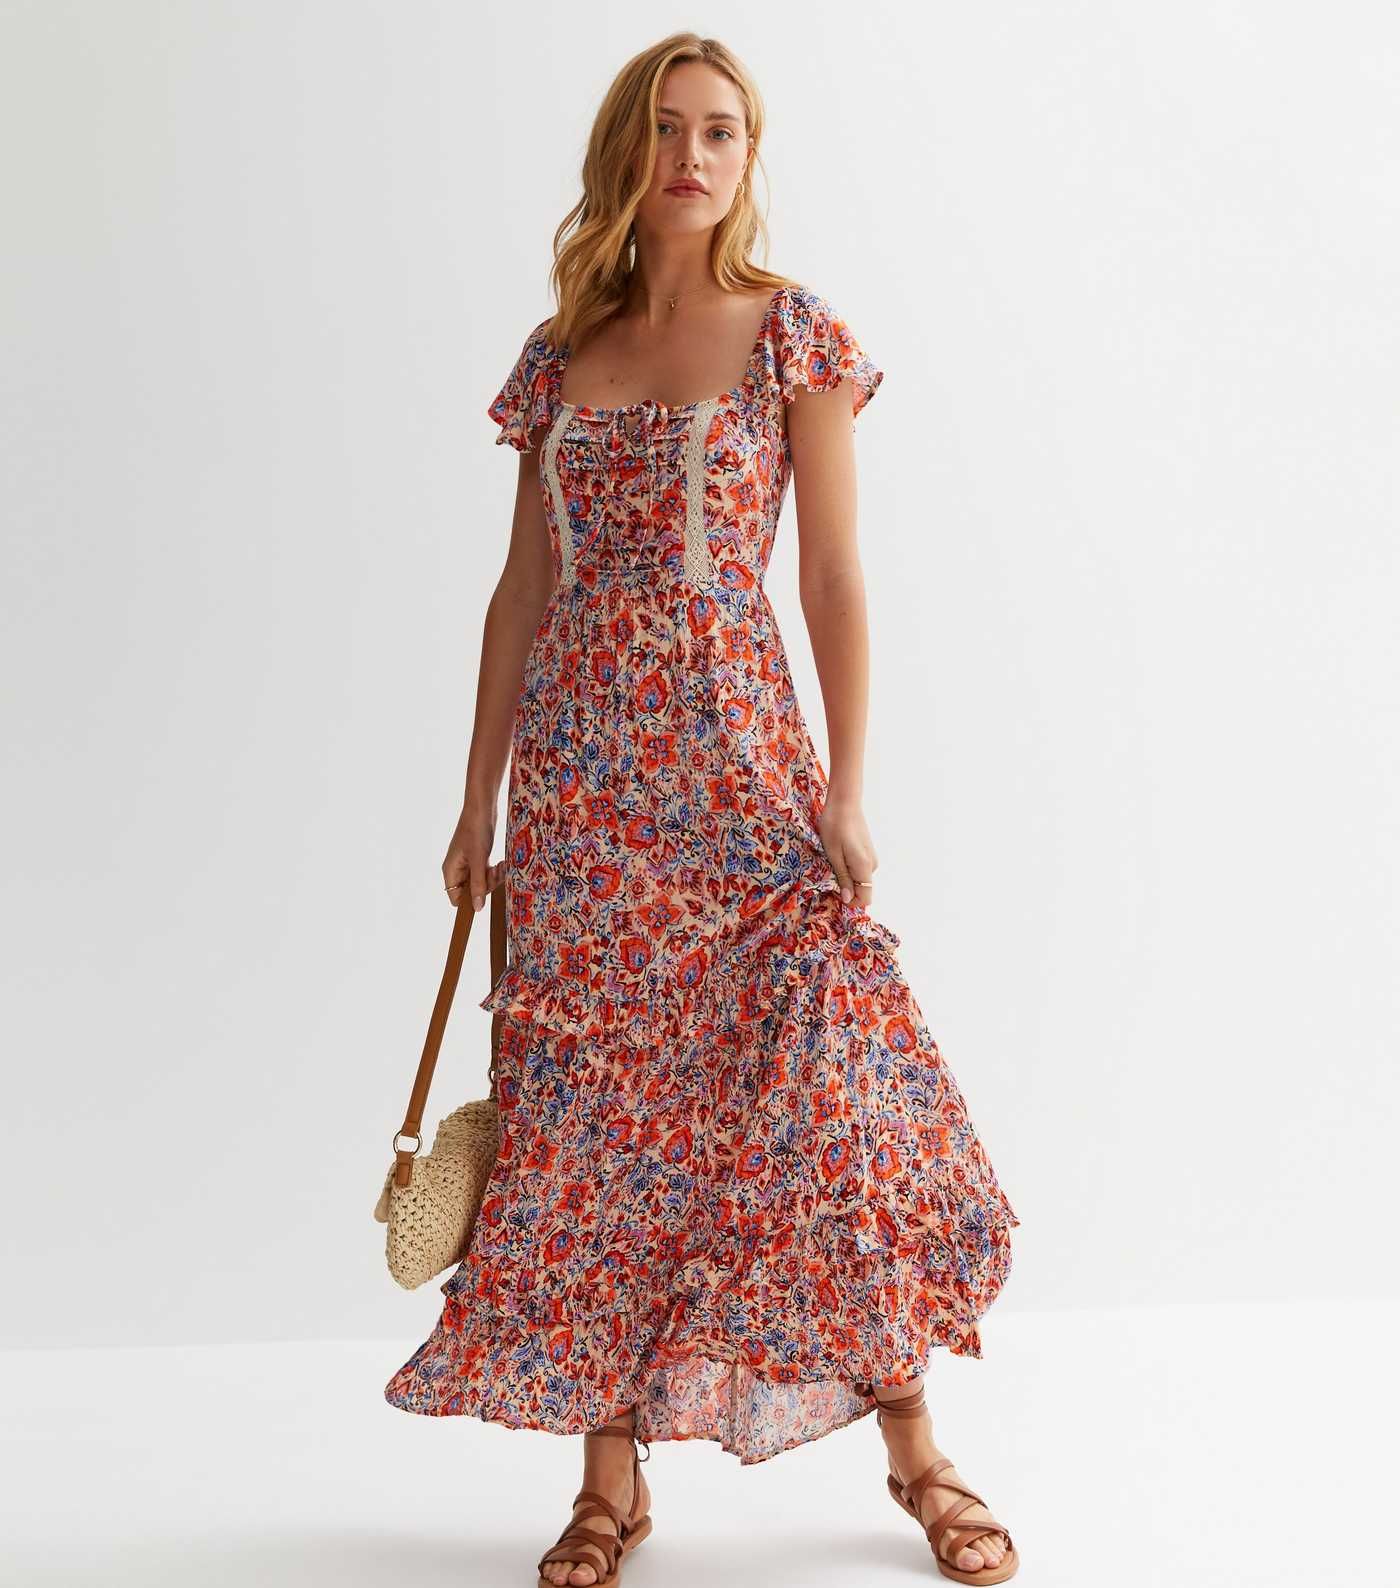 Orange Floral Square Neck Frill Maxi Dress
						
						Add to Saved Items
						Remove from Save... | New Look (UK)